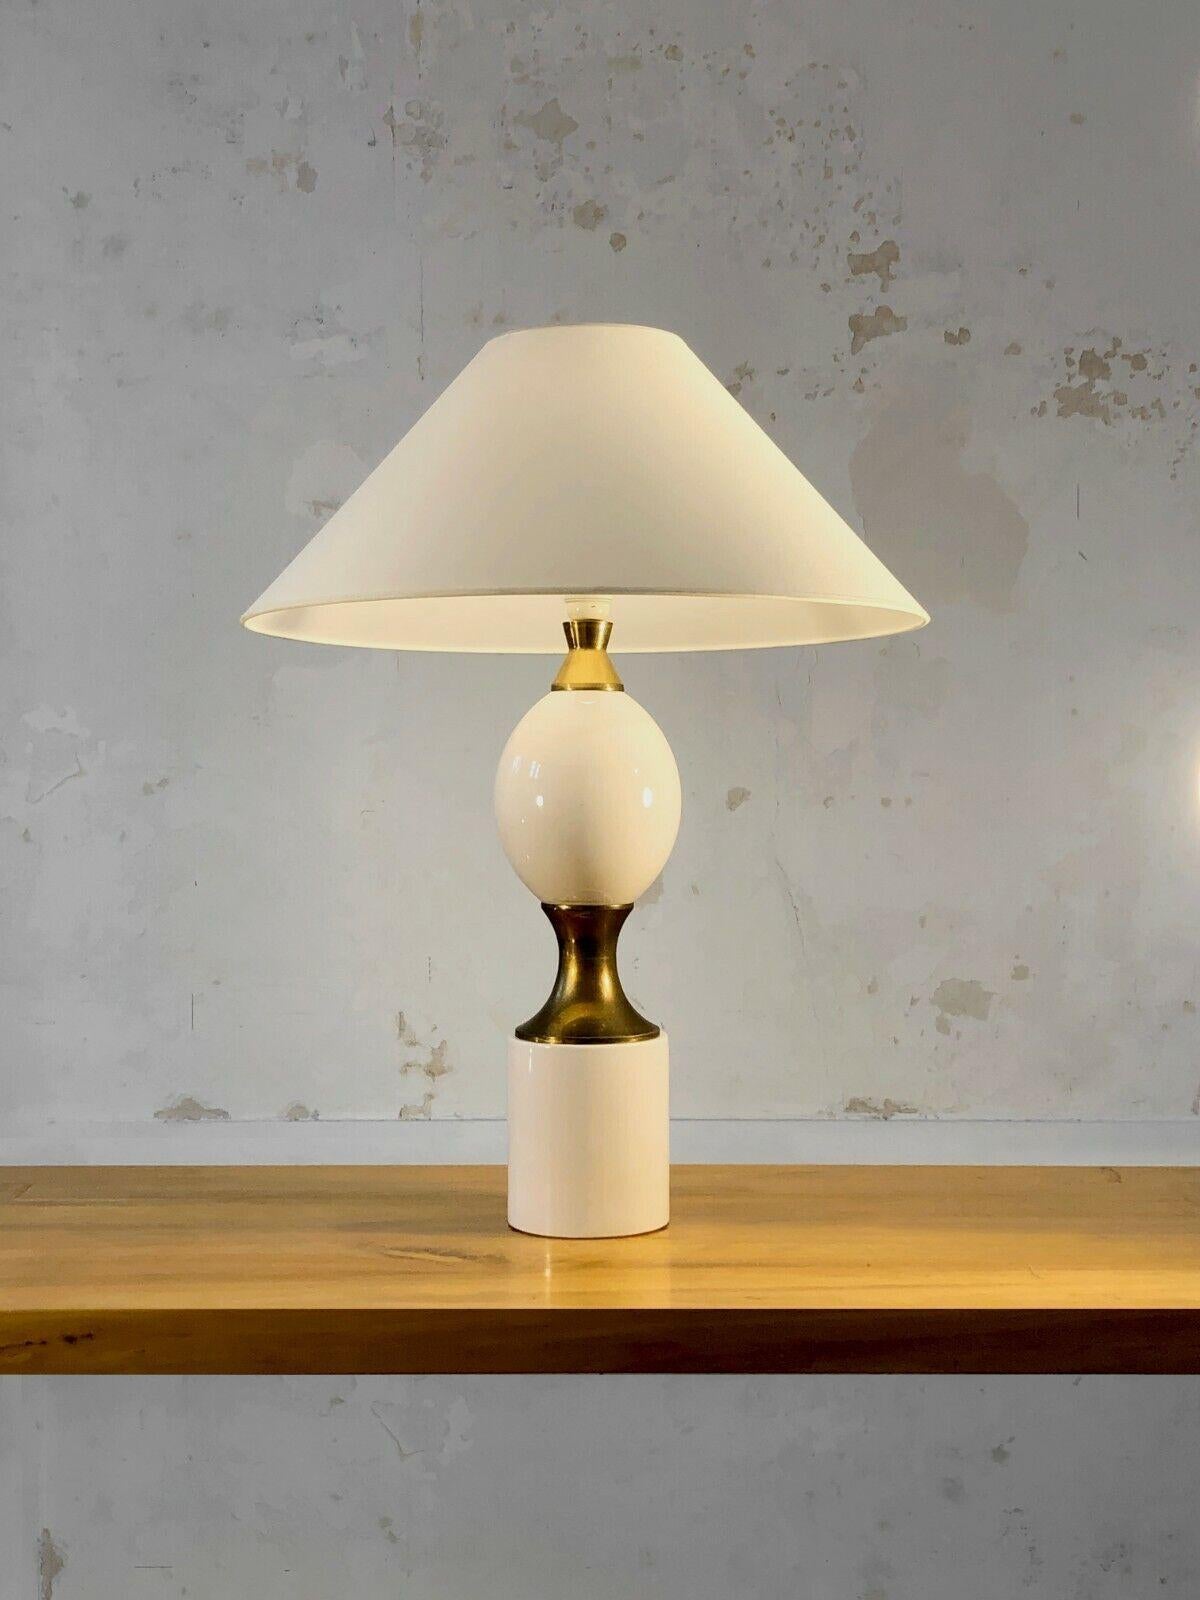 An elegant, luxurious and very large table lamp, Art-Deco, Post-Modernist, Neo-Classical, Shabby-Chic, Cylindrical base and ovoid body in thick white enameled ceramic, gilded bronze finishes, to be attributed, France 1970.

A formal similarity with